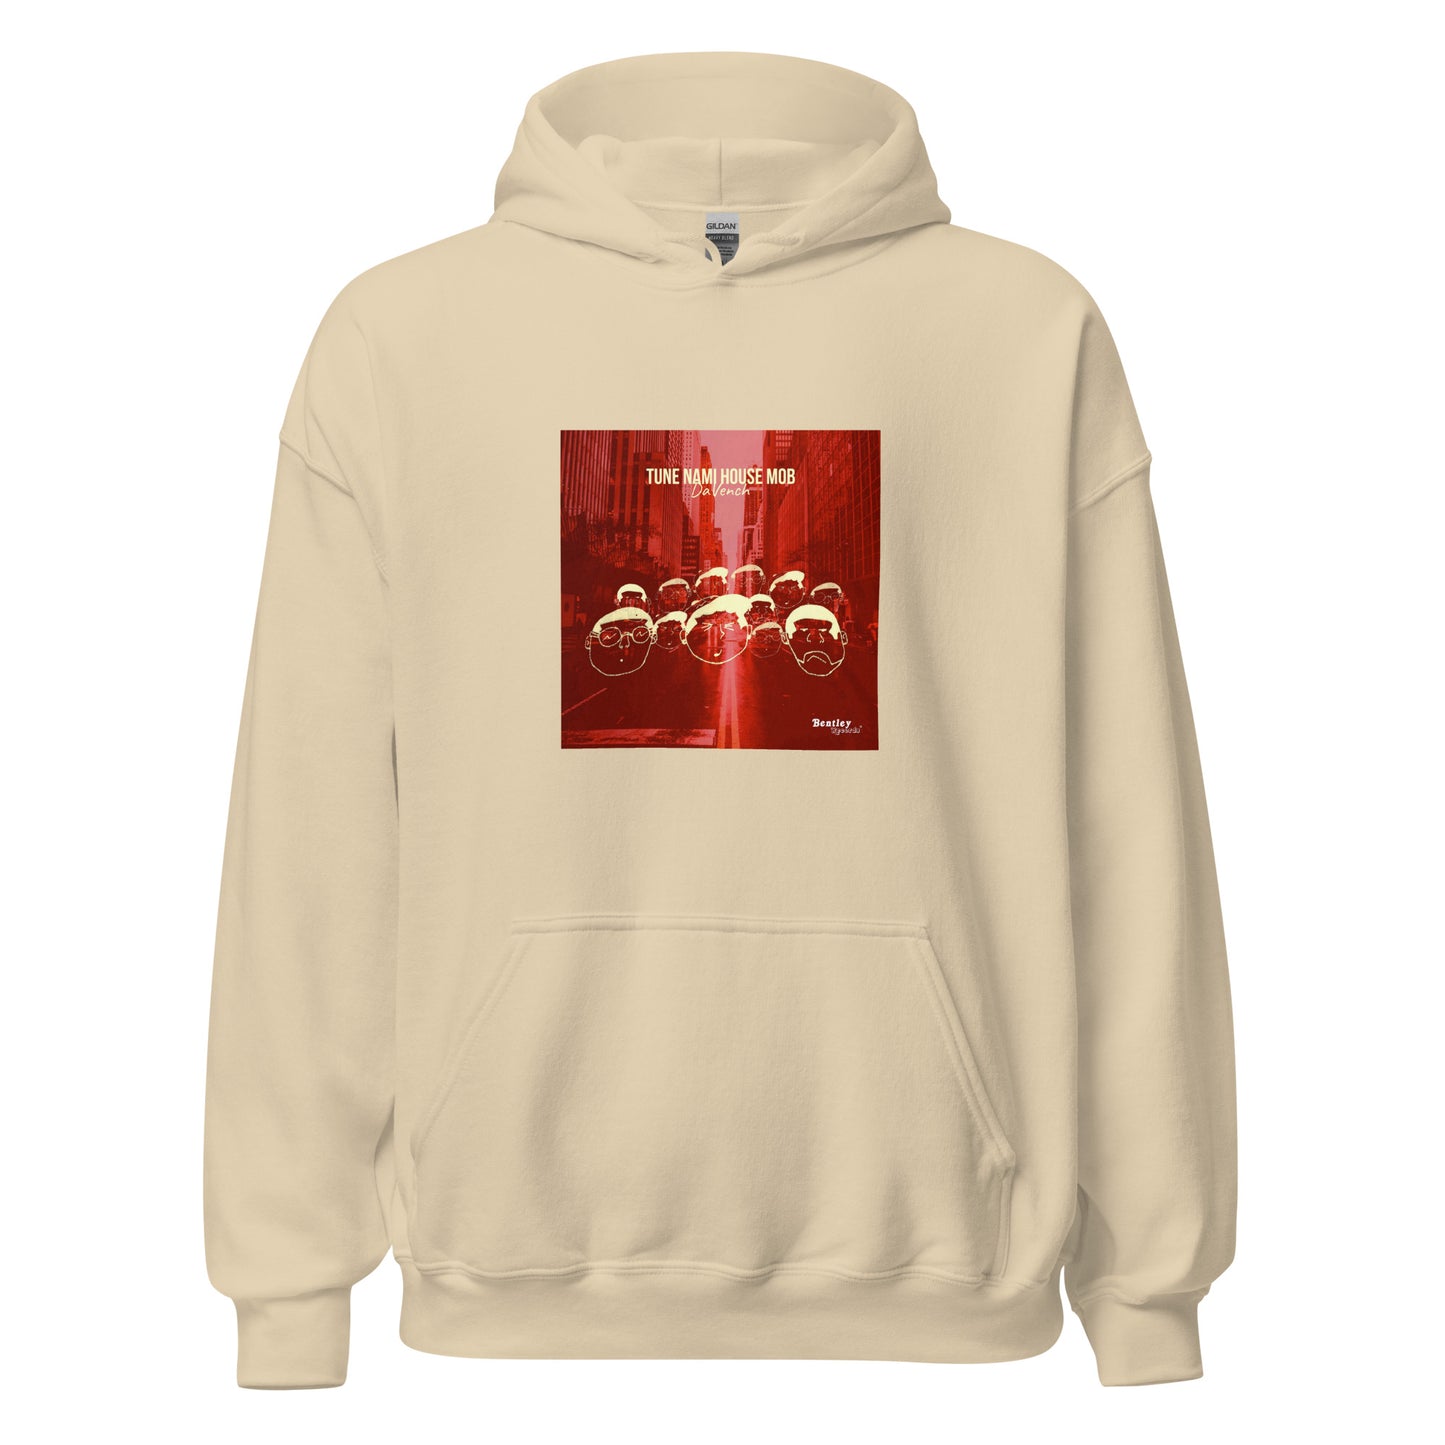 Tune Nami House Mob Red Album Cover Unisex Hoodie